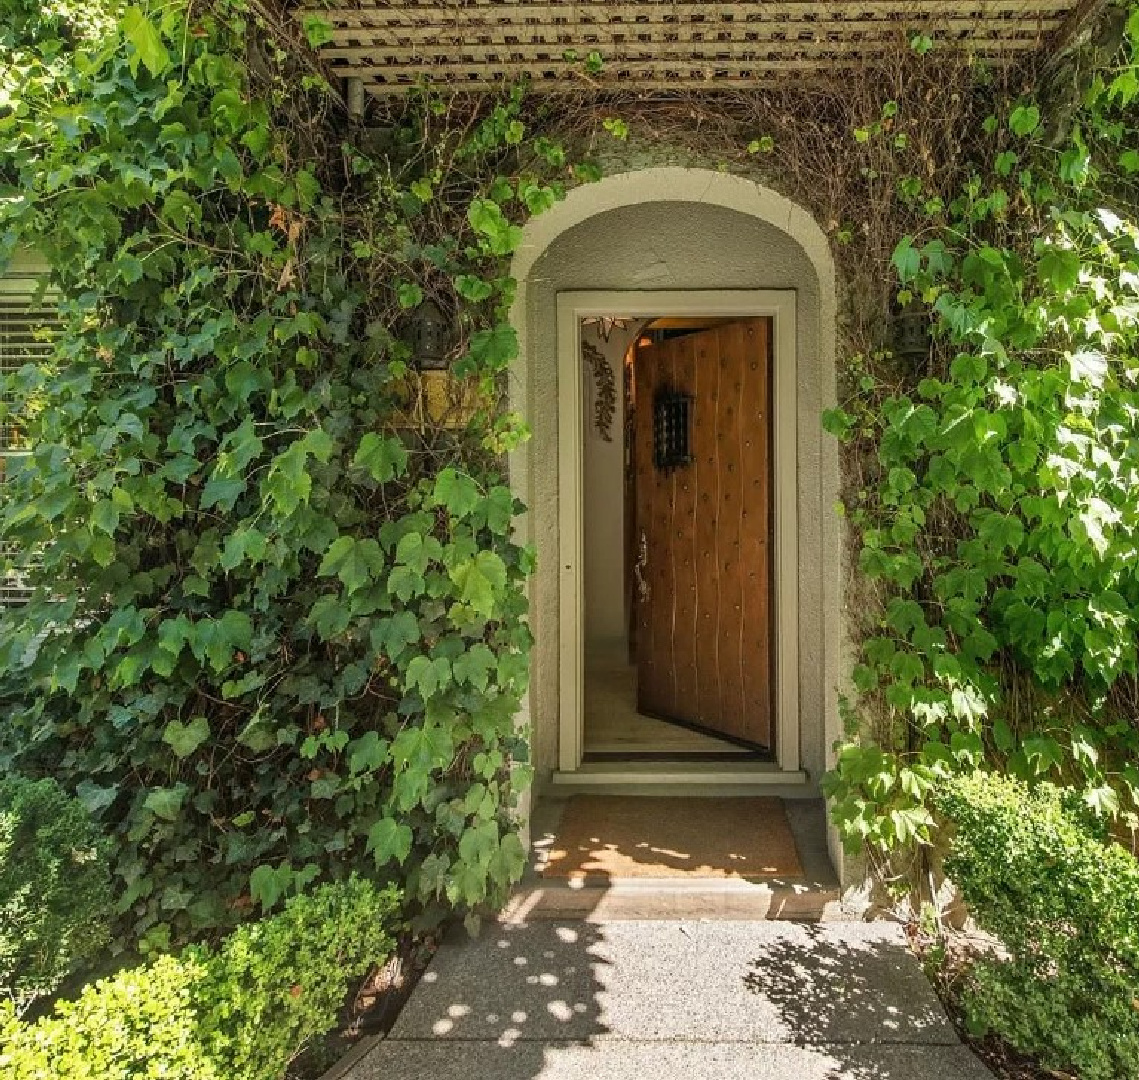 1935 ivy covered Southern California cottage with Parisian style interiors by Myra Hoefer. #ivycovered #californiacottage #myrahoefer